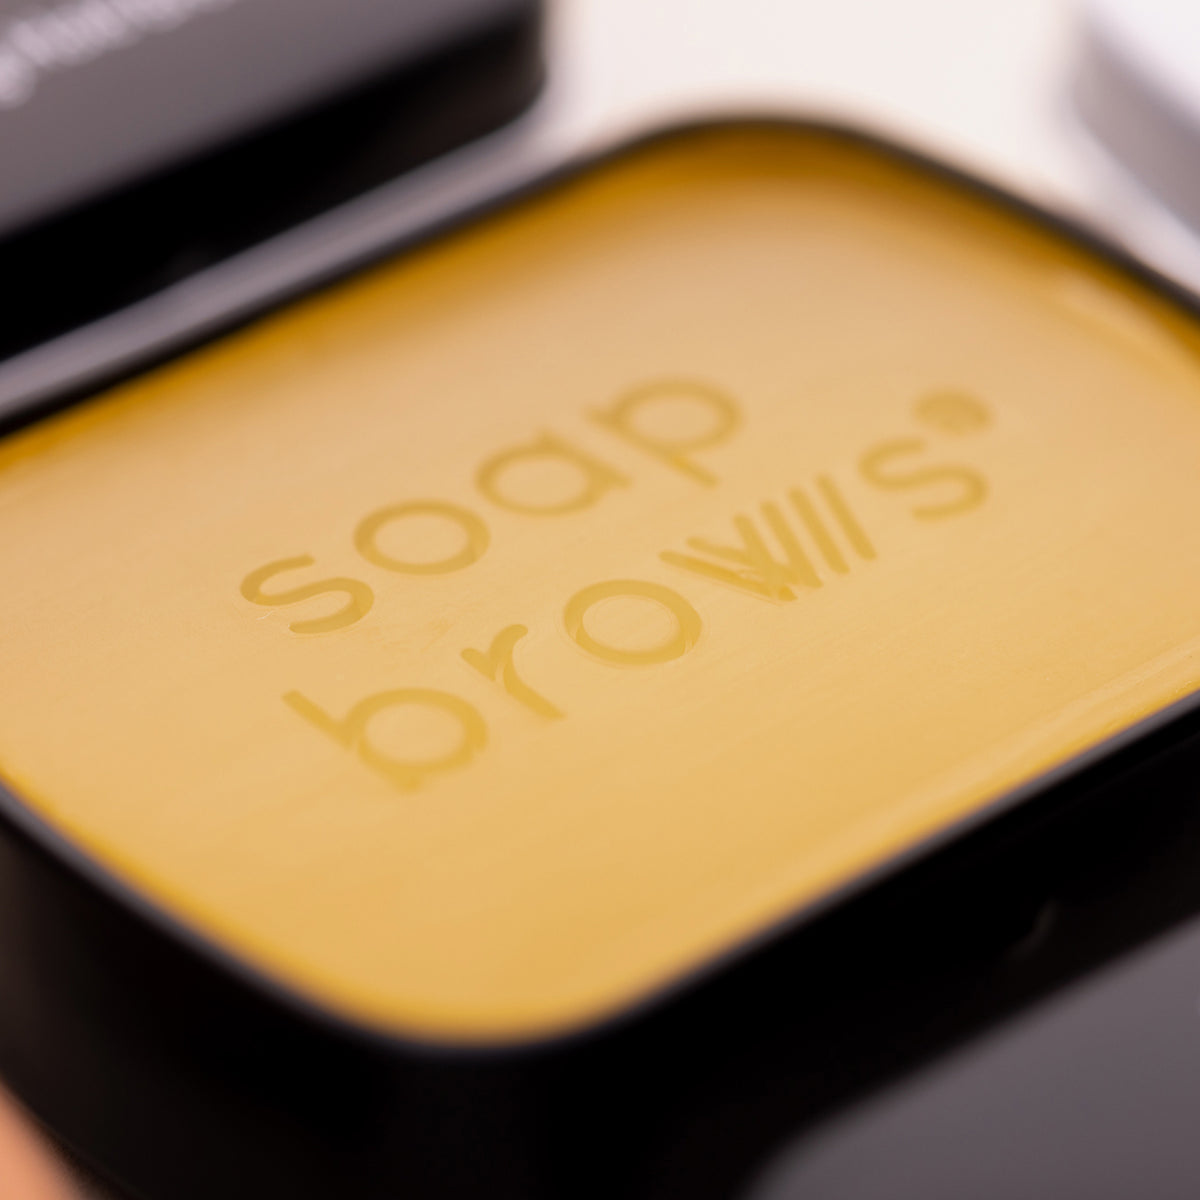 West Barn Co. | Soap Brows Extra Strong Single Soap